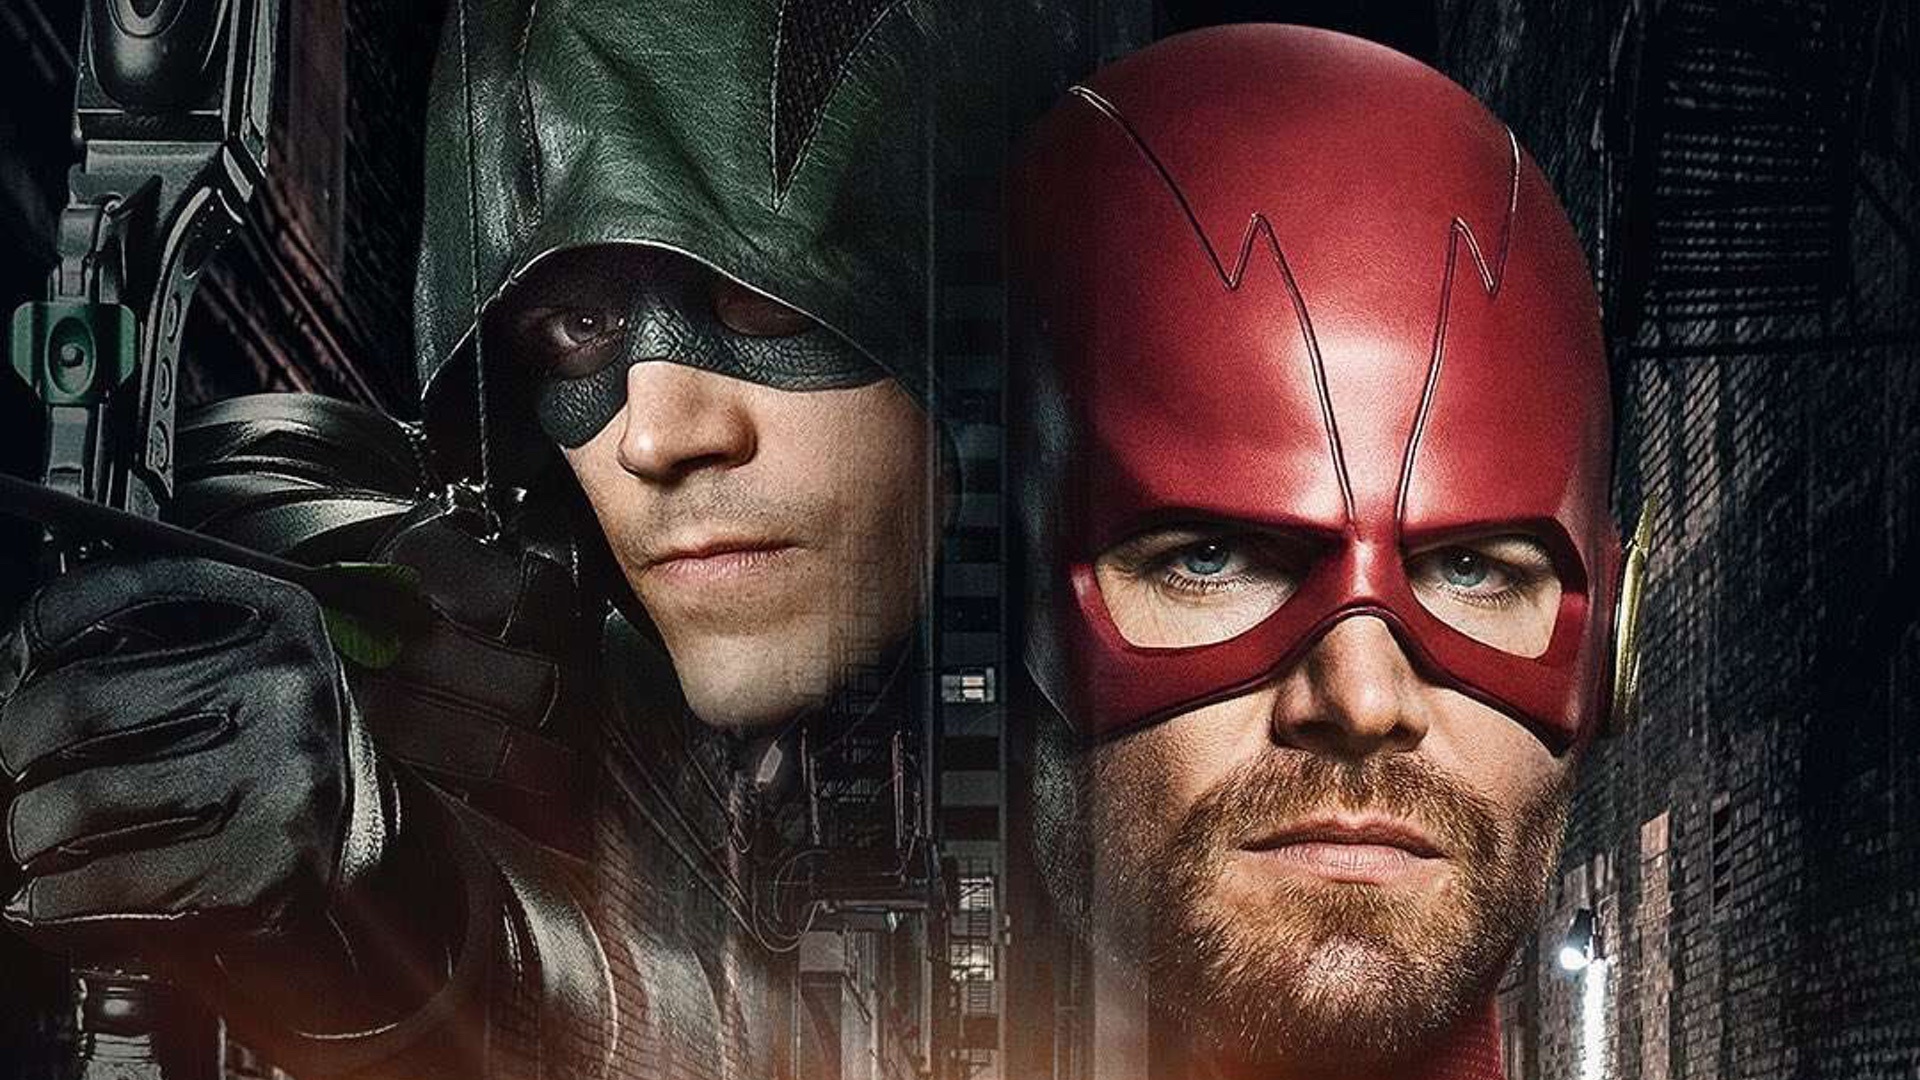 Green Arrow and Flash: "Elseworlds", the fifth Arrowverse crossover event, The CW. 1920x1080 Full HD Wallpaper.